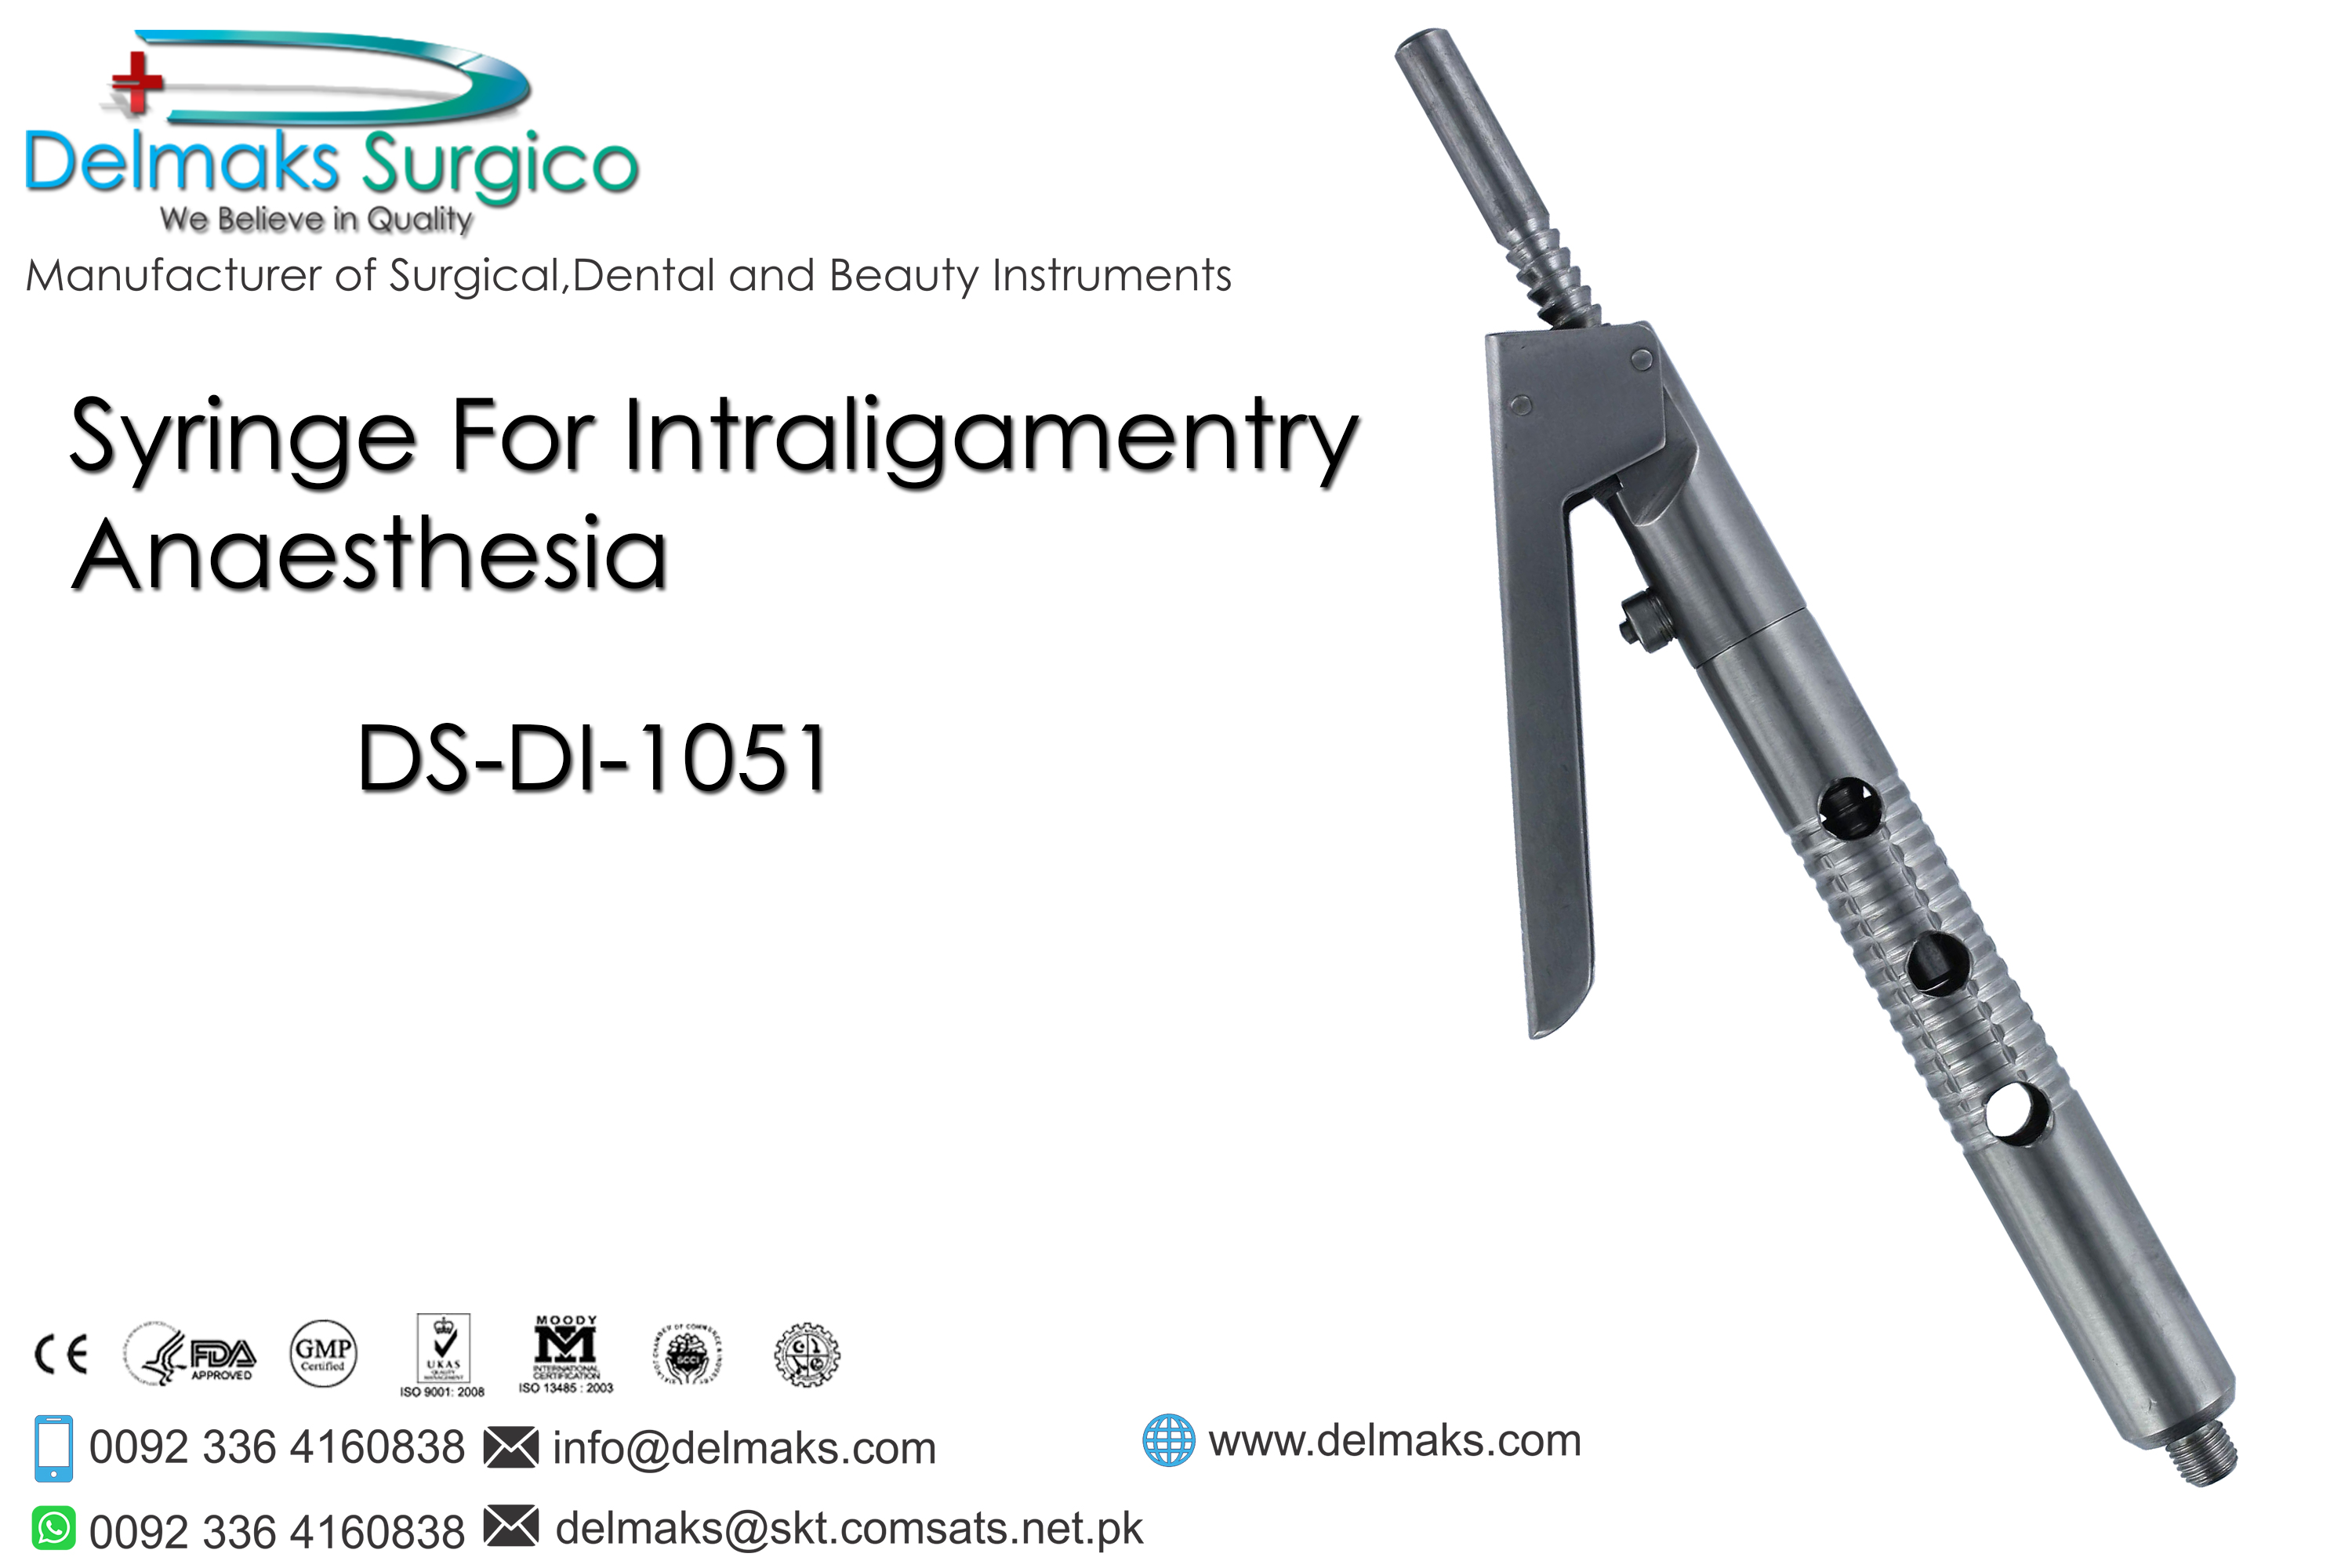 Syringe For Intraligamentry Anaesthesia-Dental Syringes-Dental Instruments-Delmaks Surgico